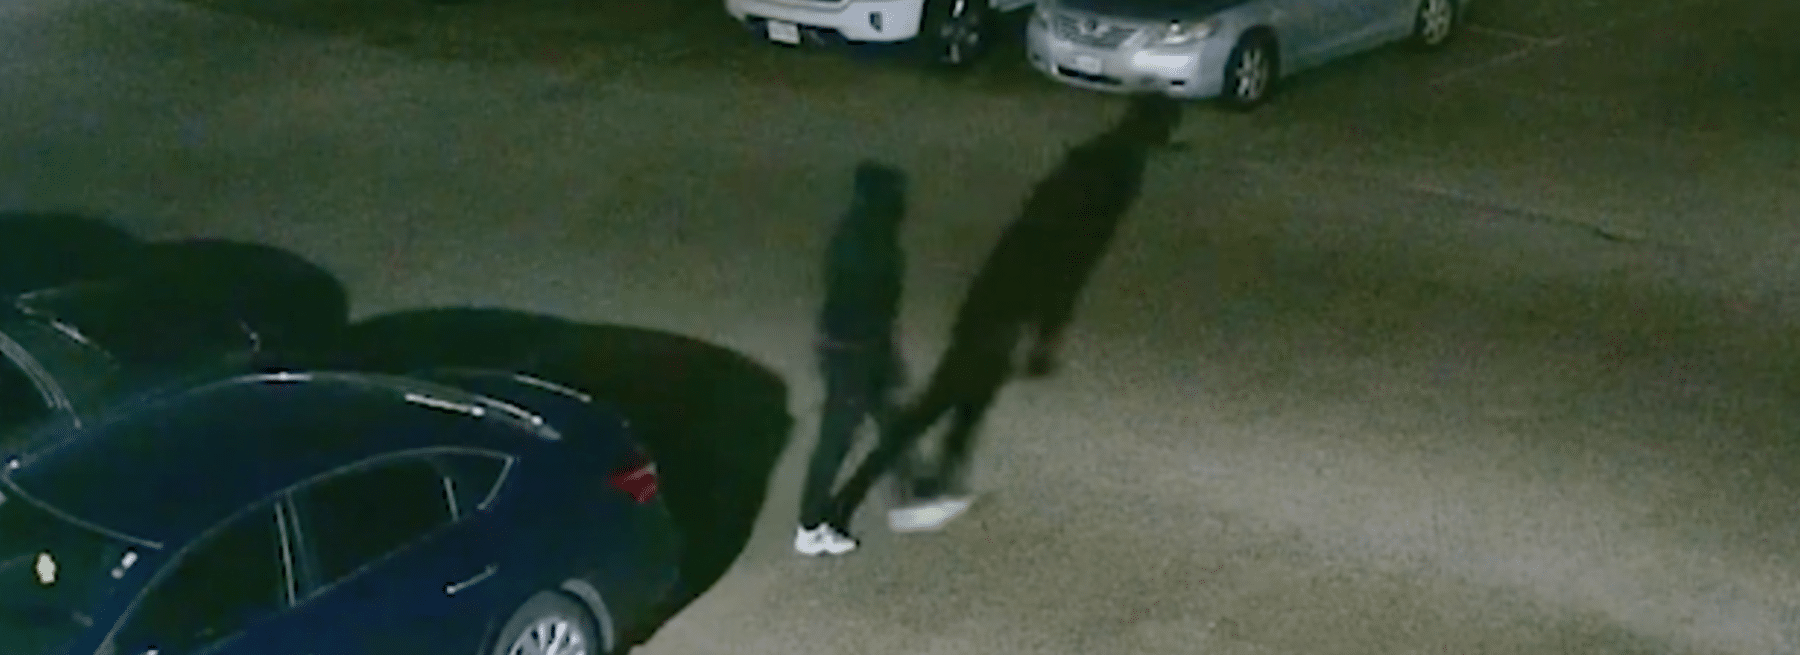 Pair of packing lot prowlers at Texas apartment